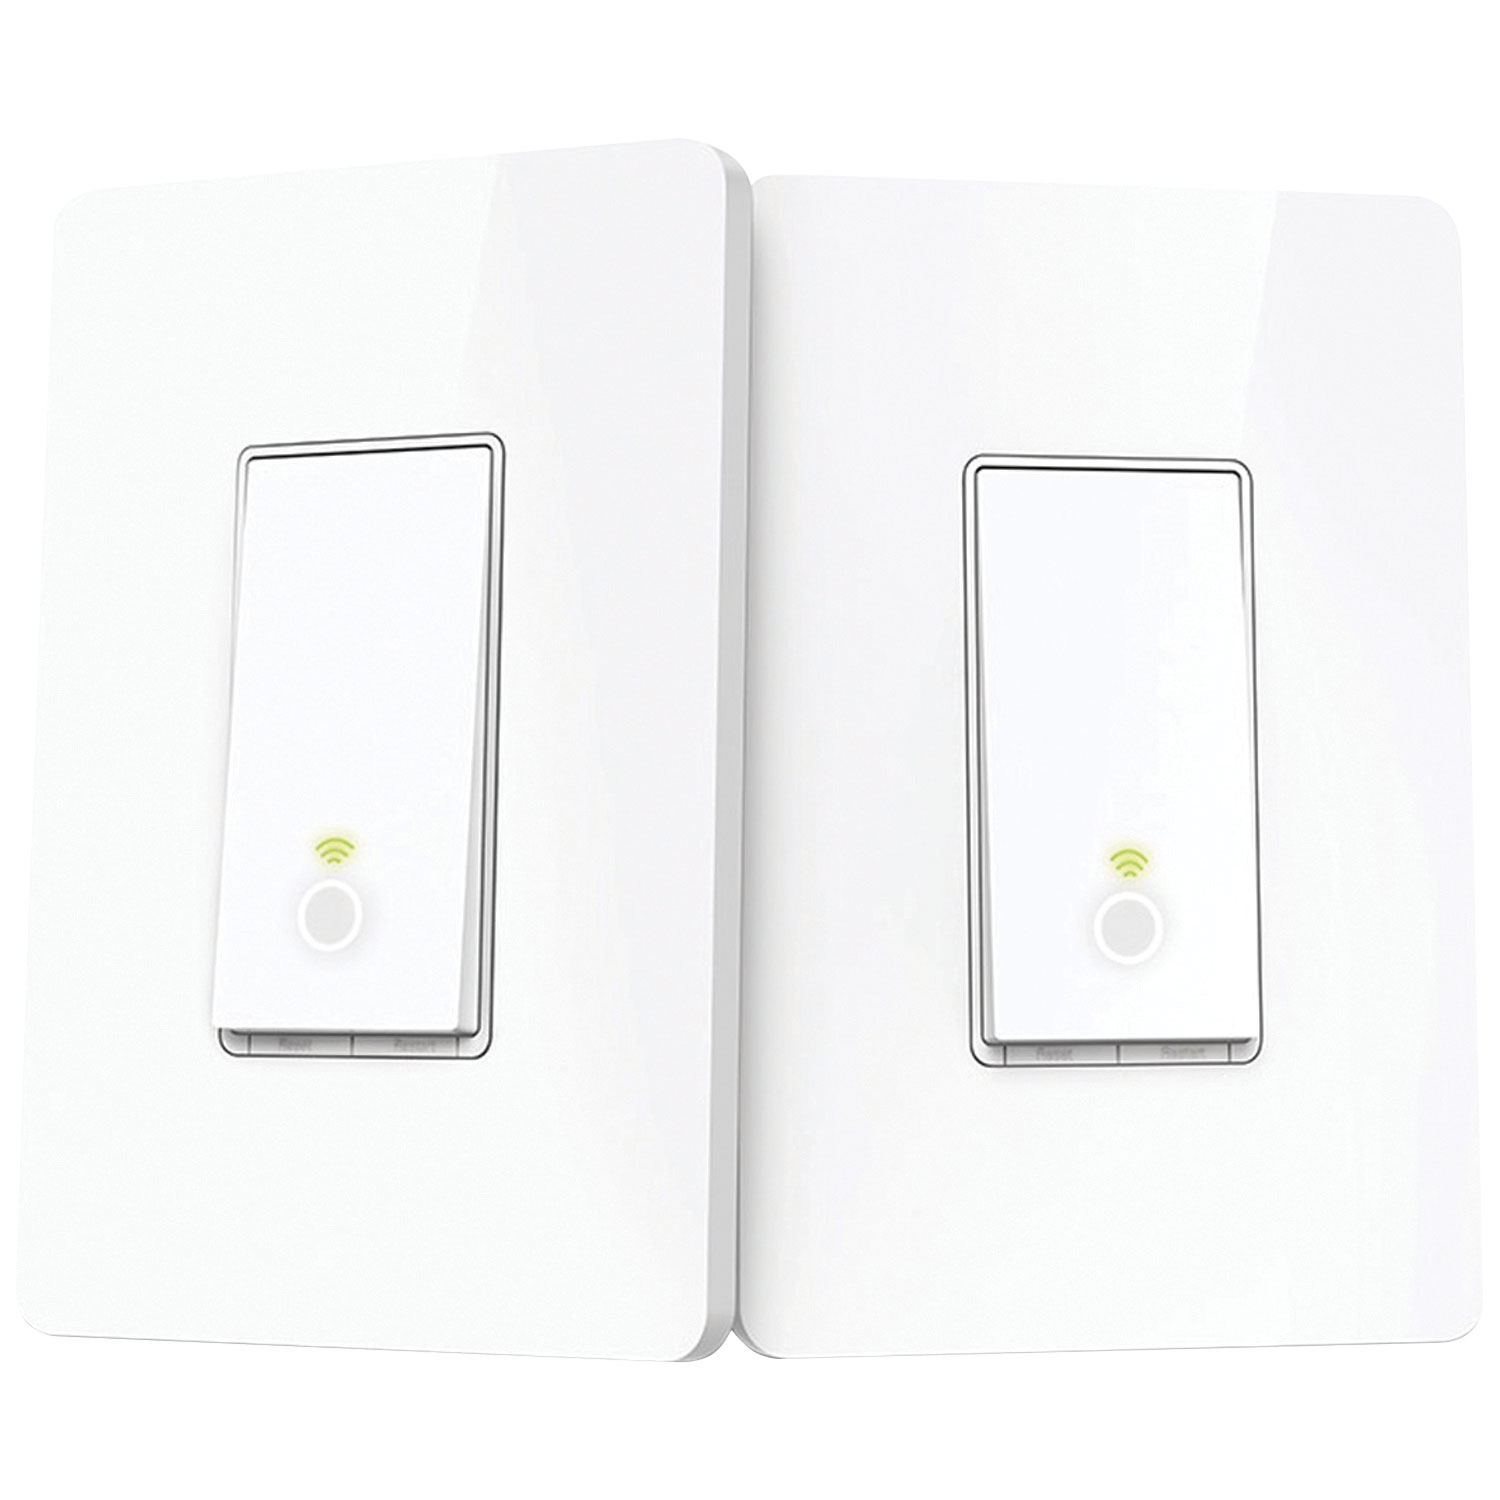 TP-Link Wi-Fi Light Switch - 2 Pack